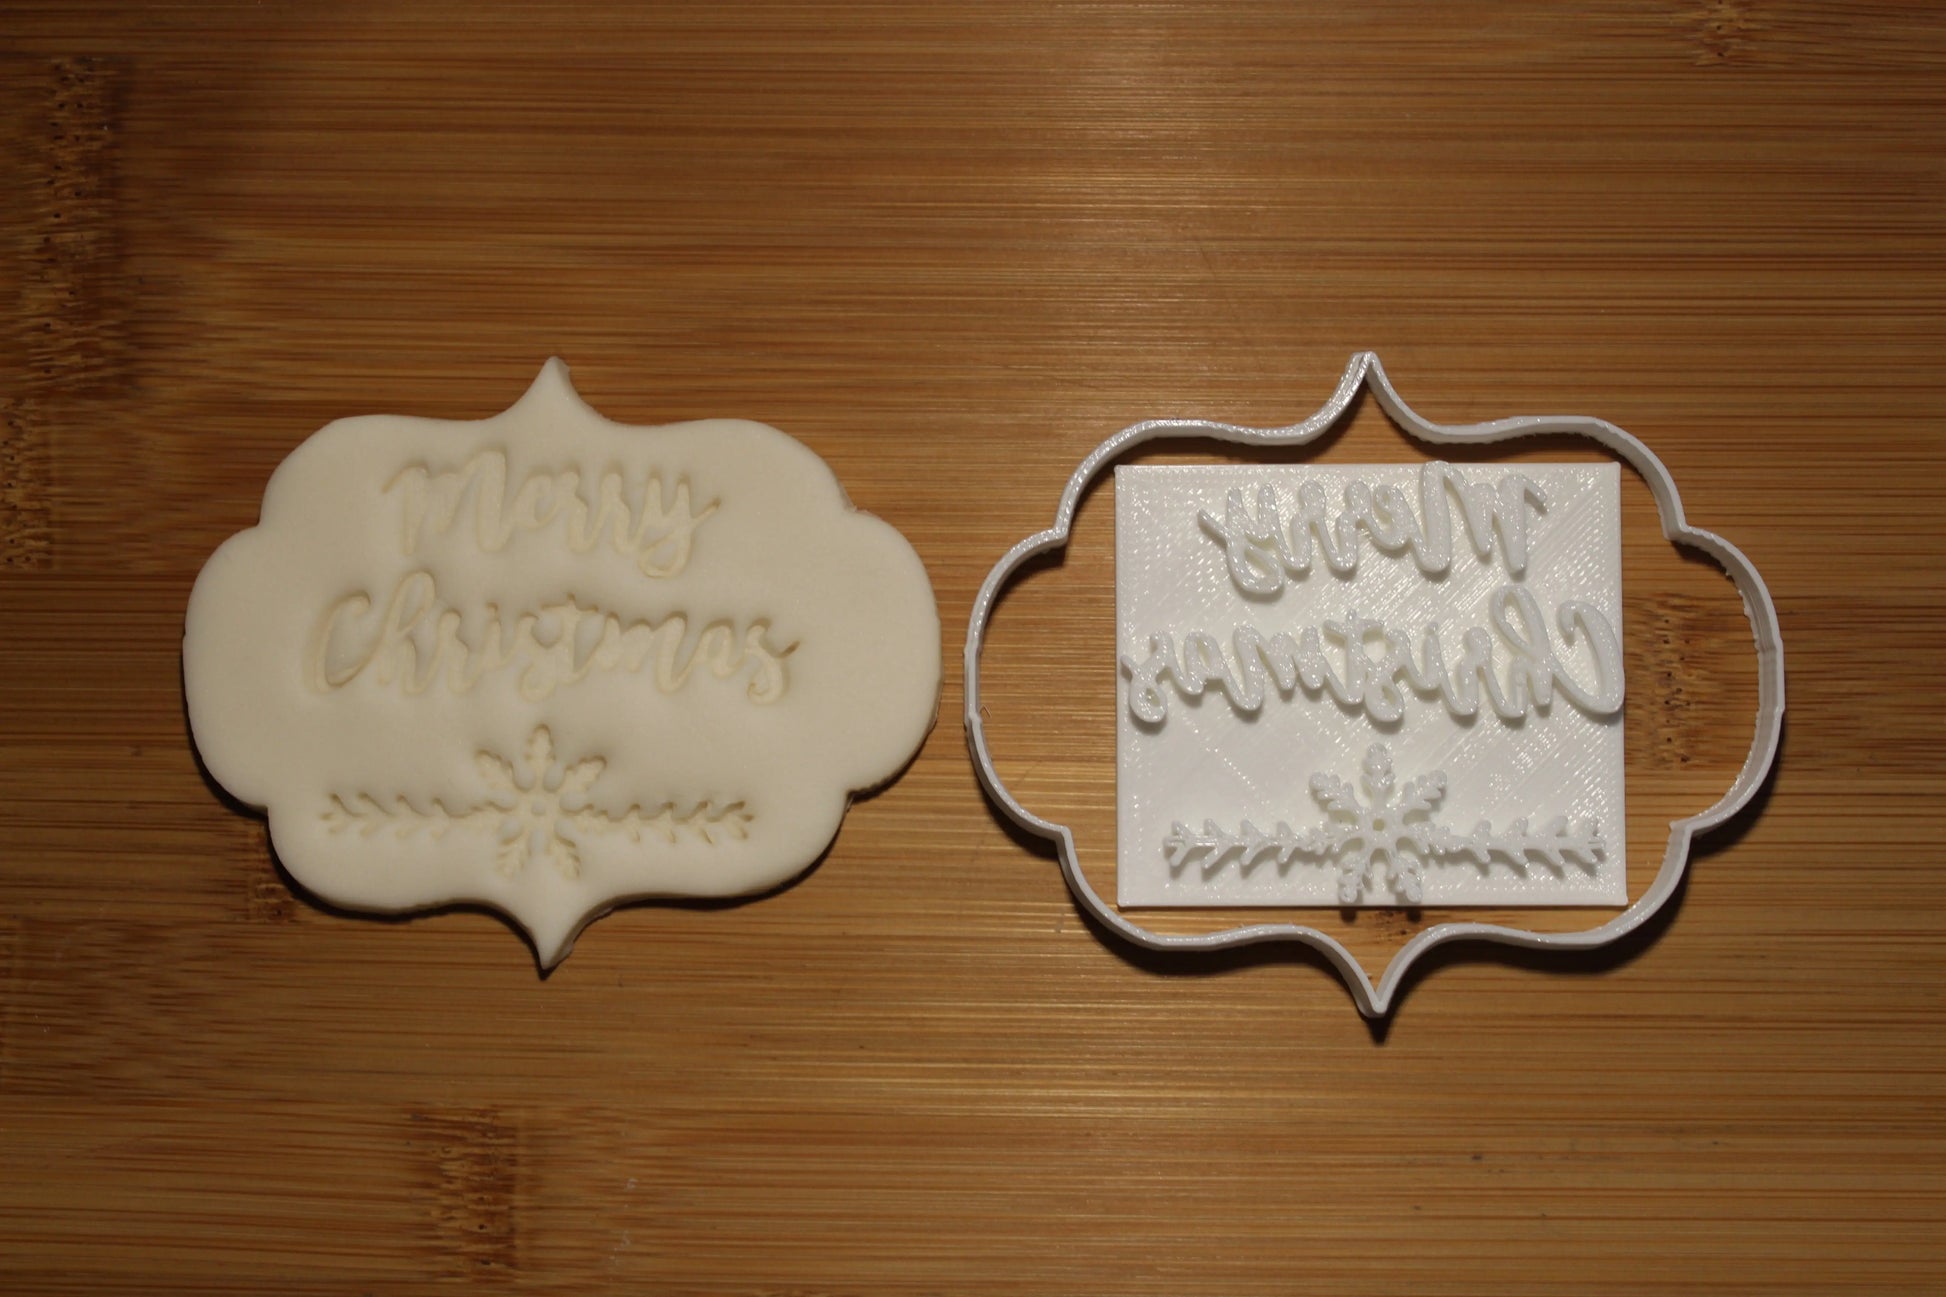 Merry Christmas - Cookie cutter + stamp MEG cookie cutters